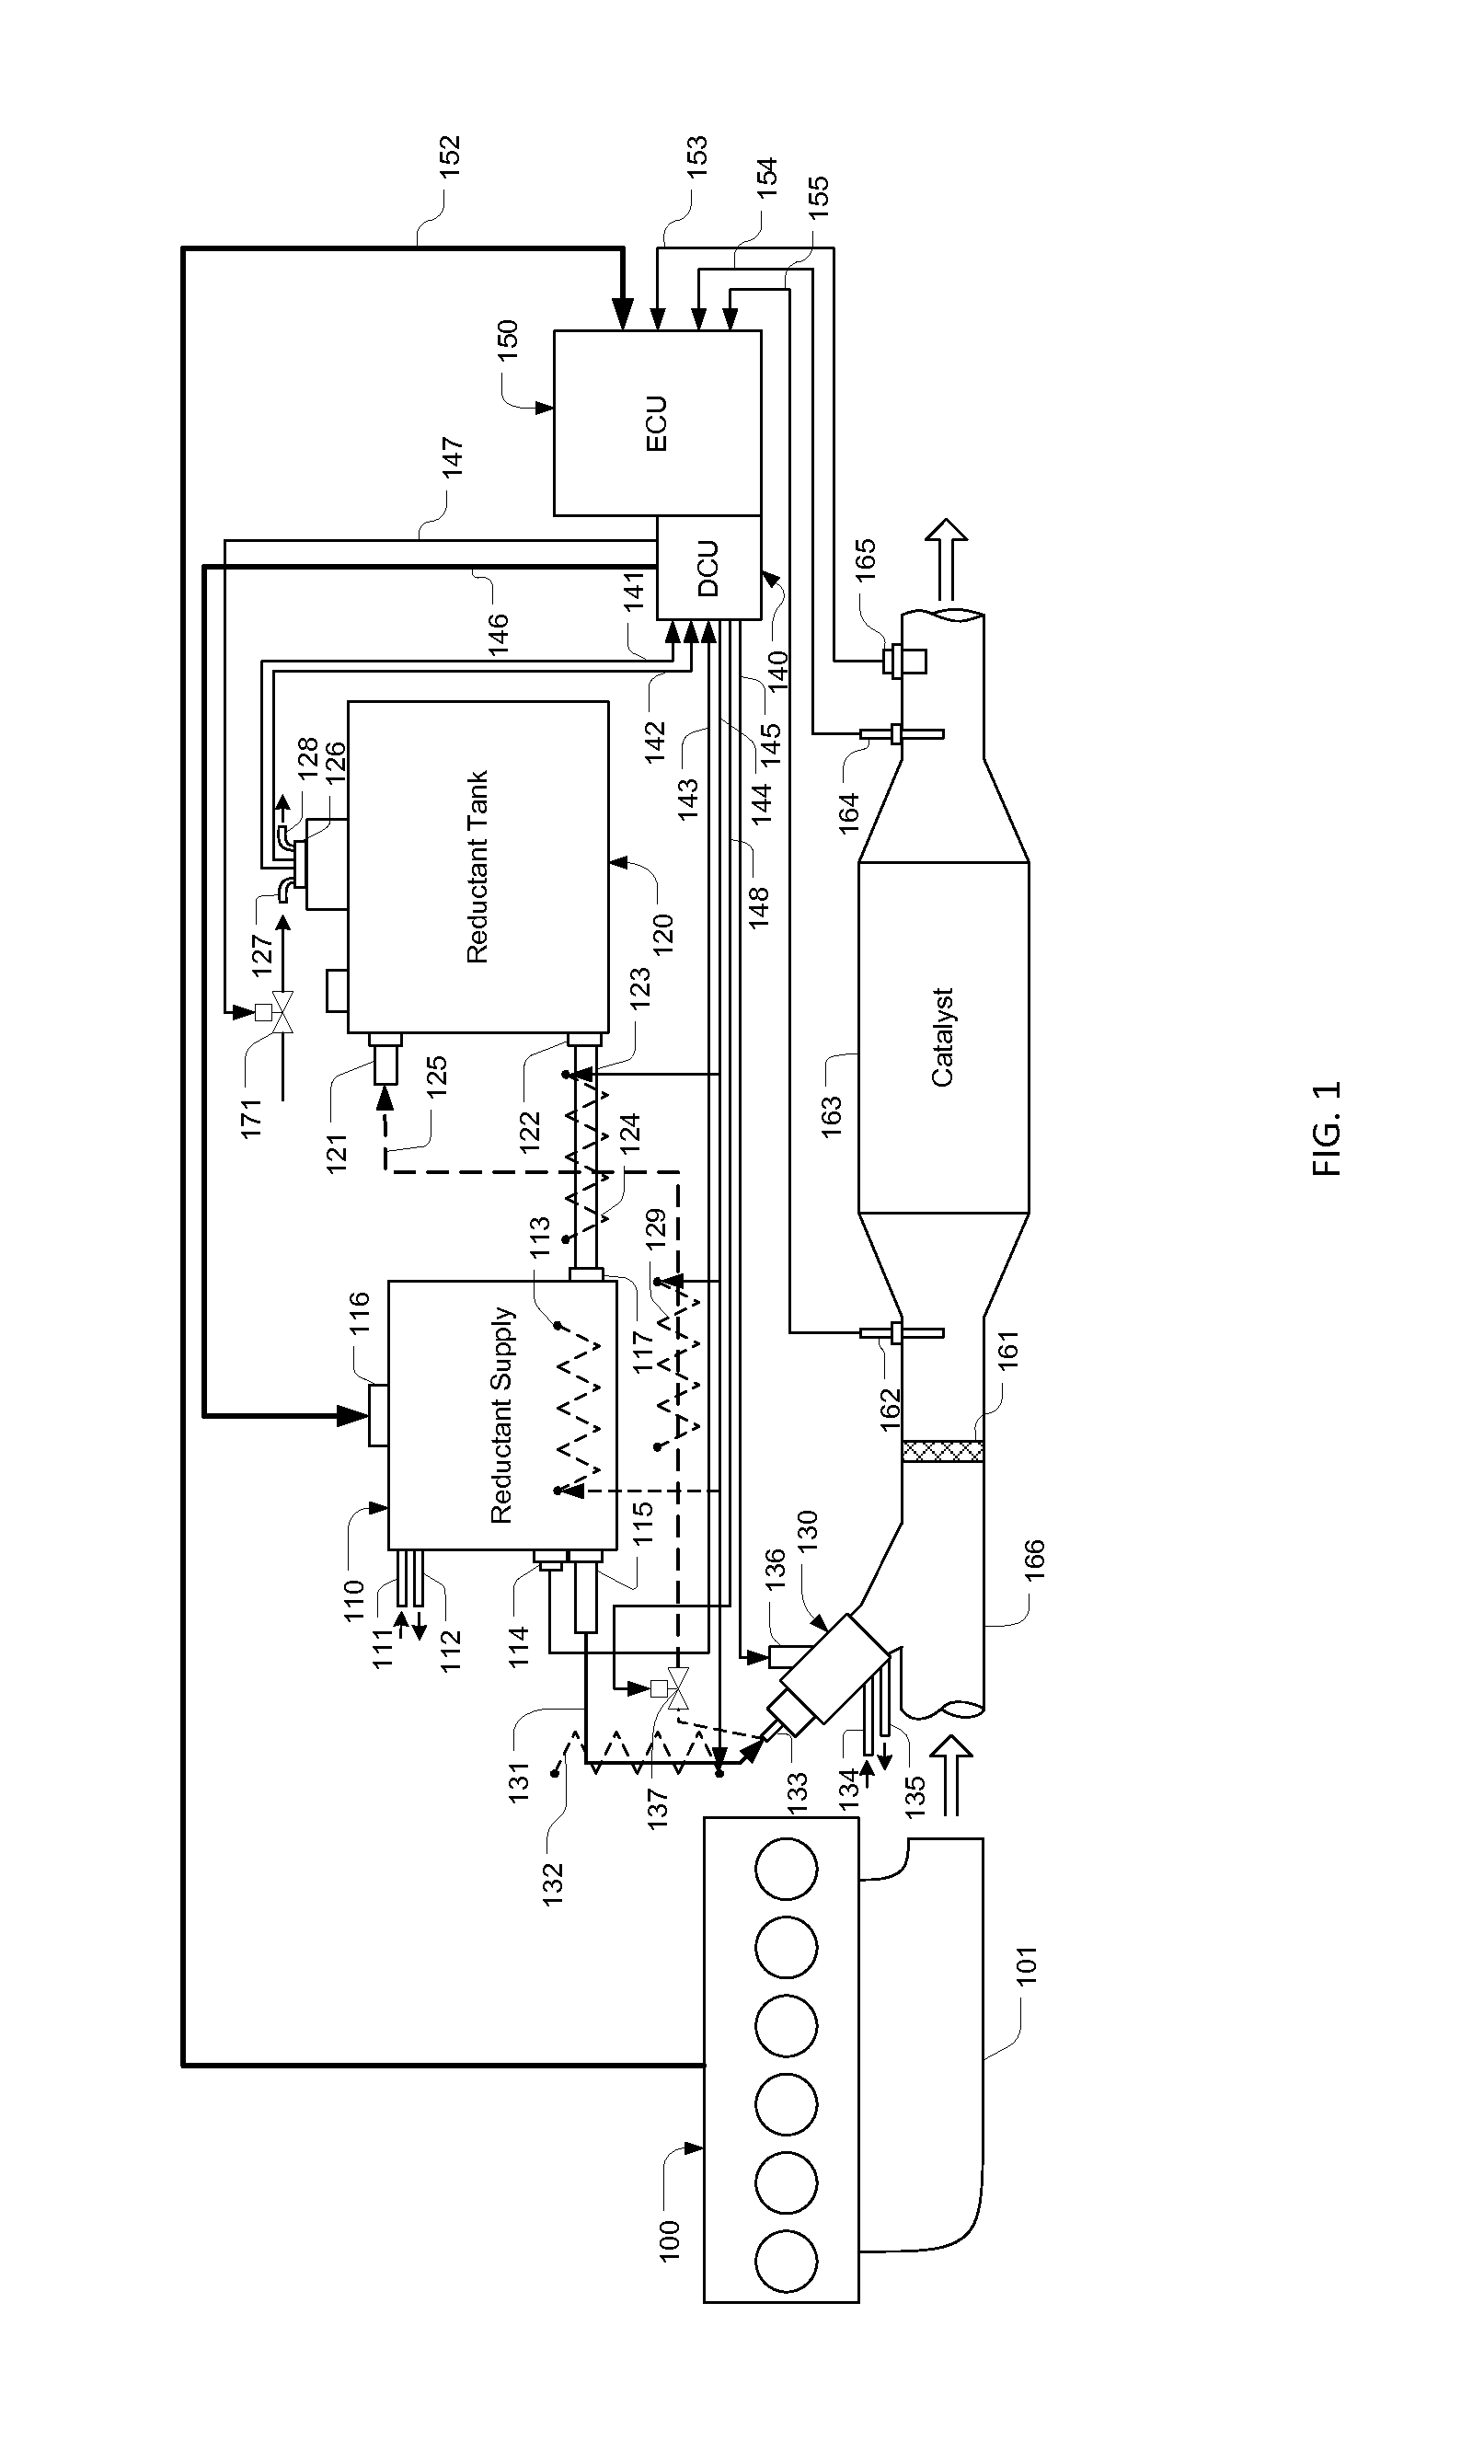 Air driven reductant delivery system